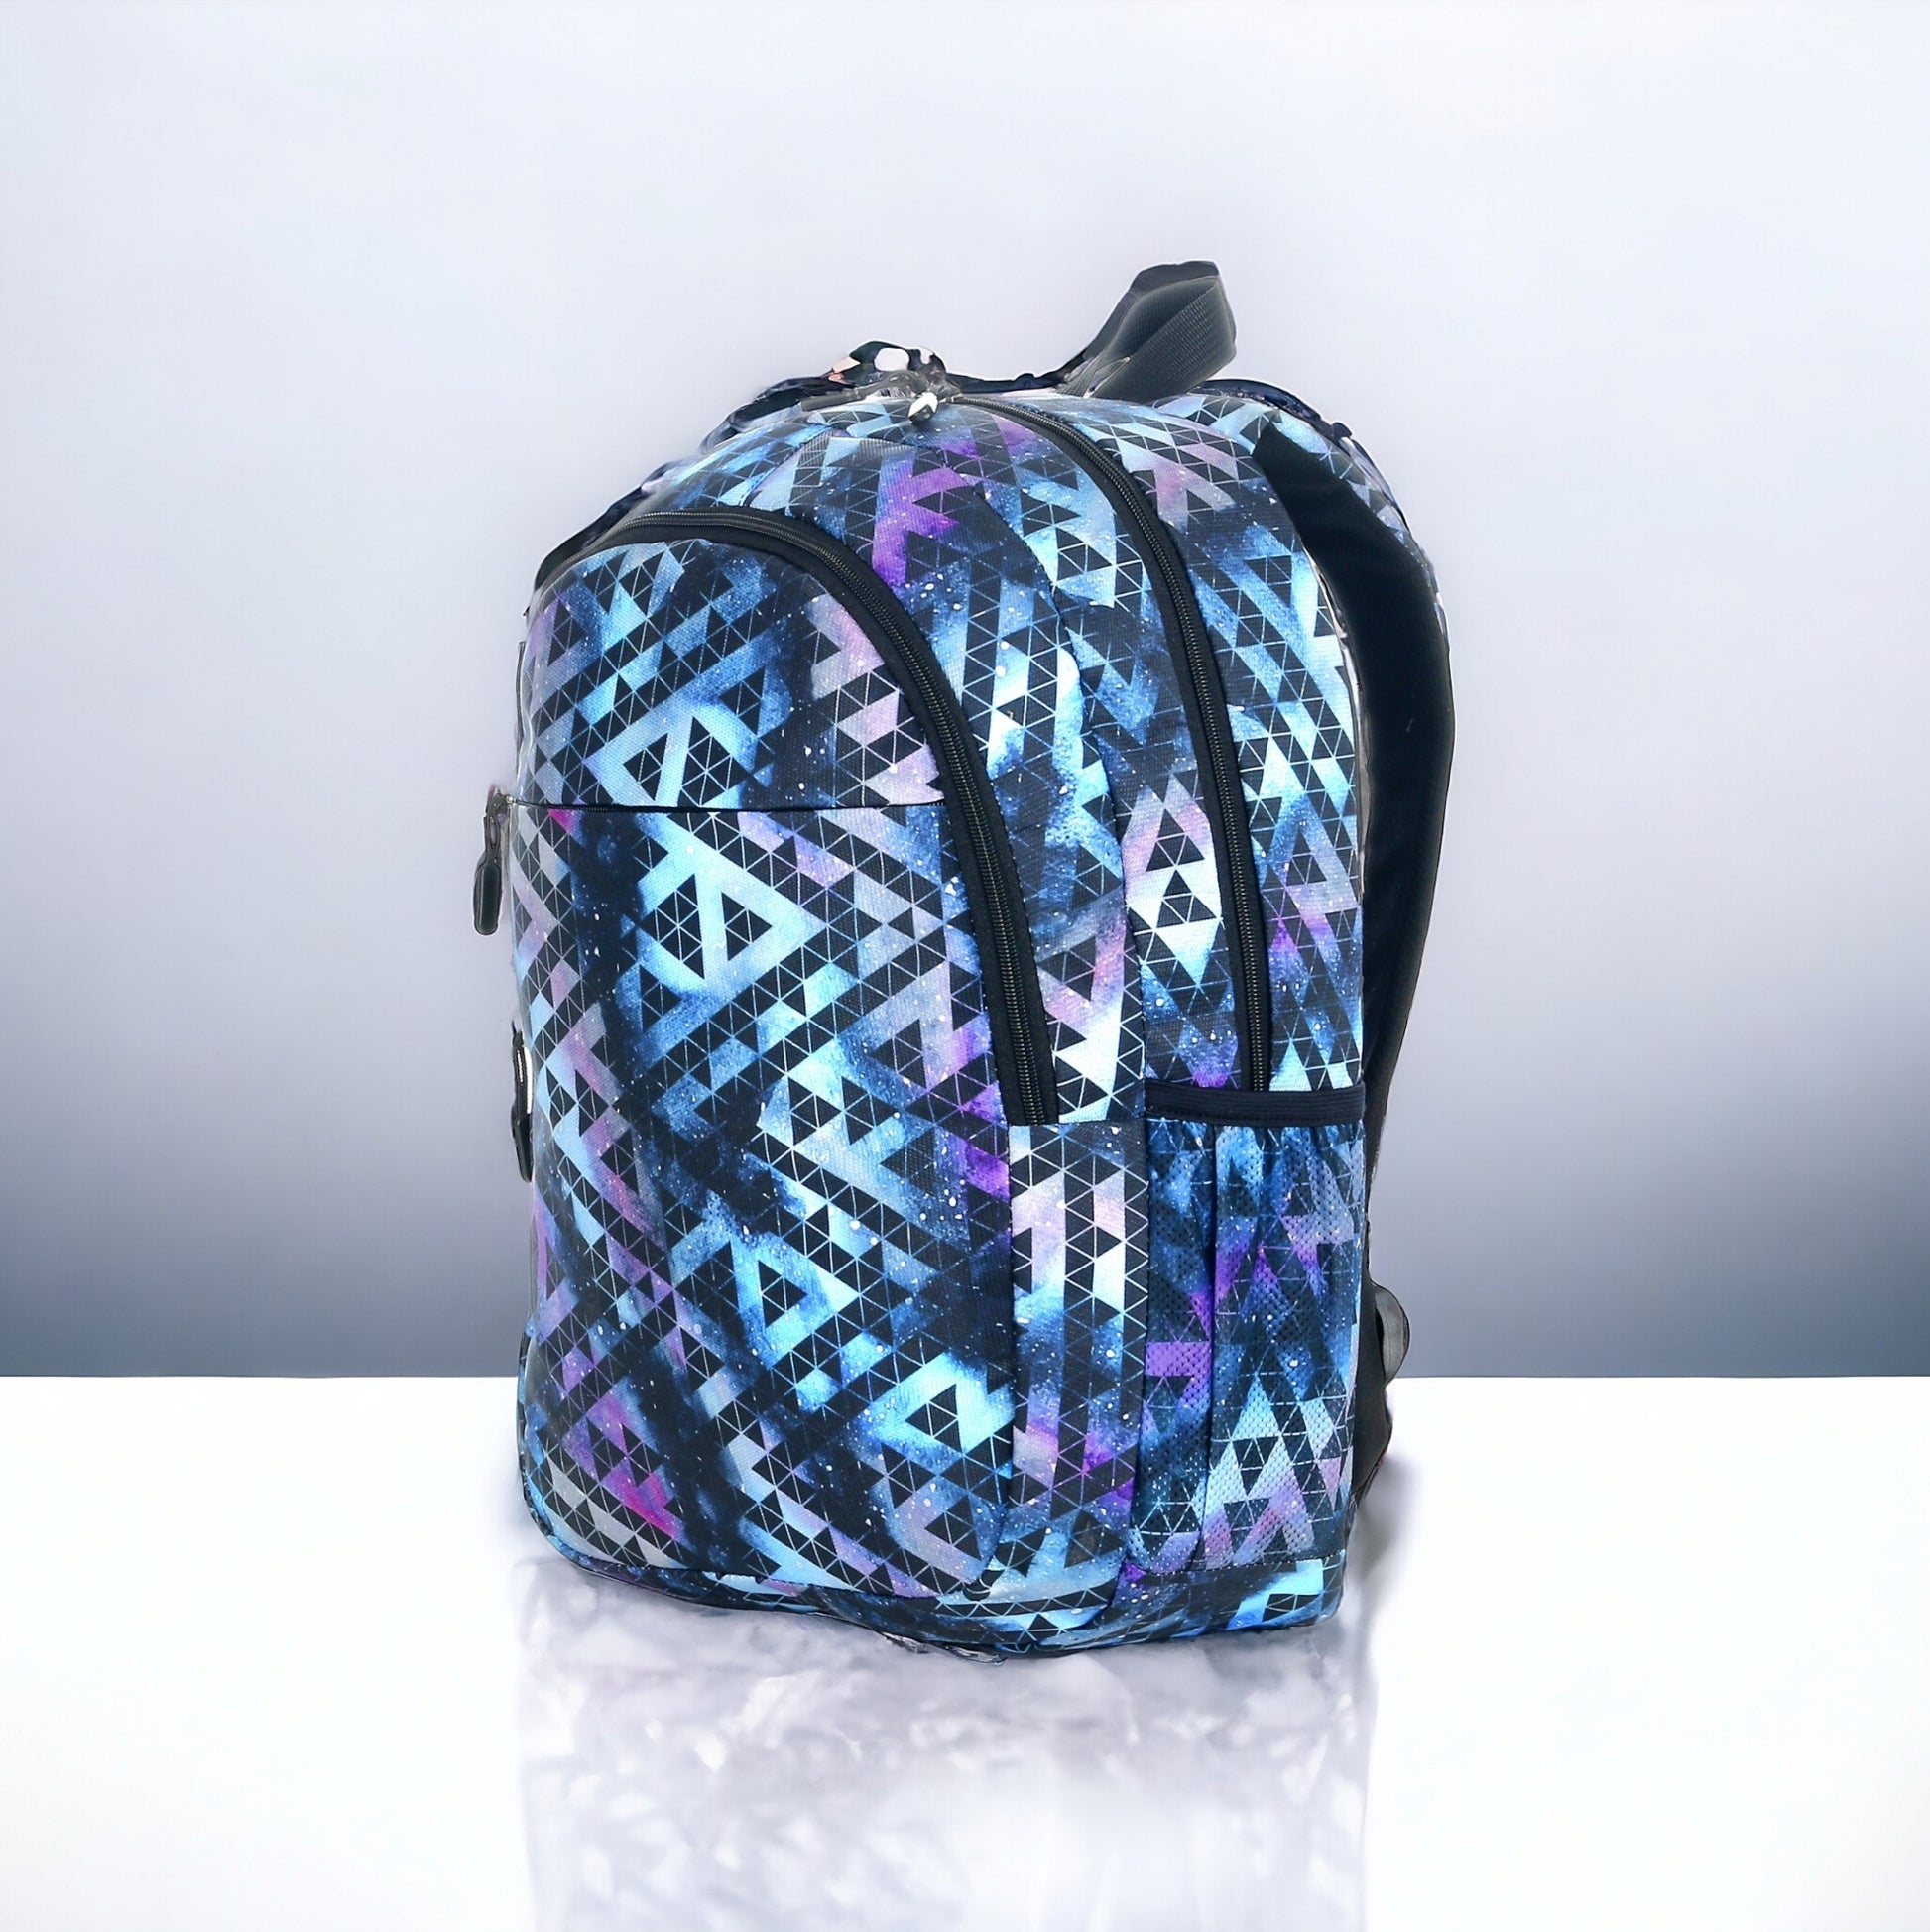 Force Backpack Unisex -multi color- new edition - FNE-027